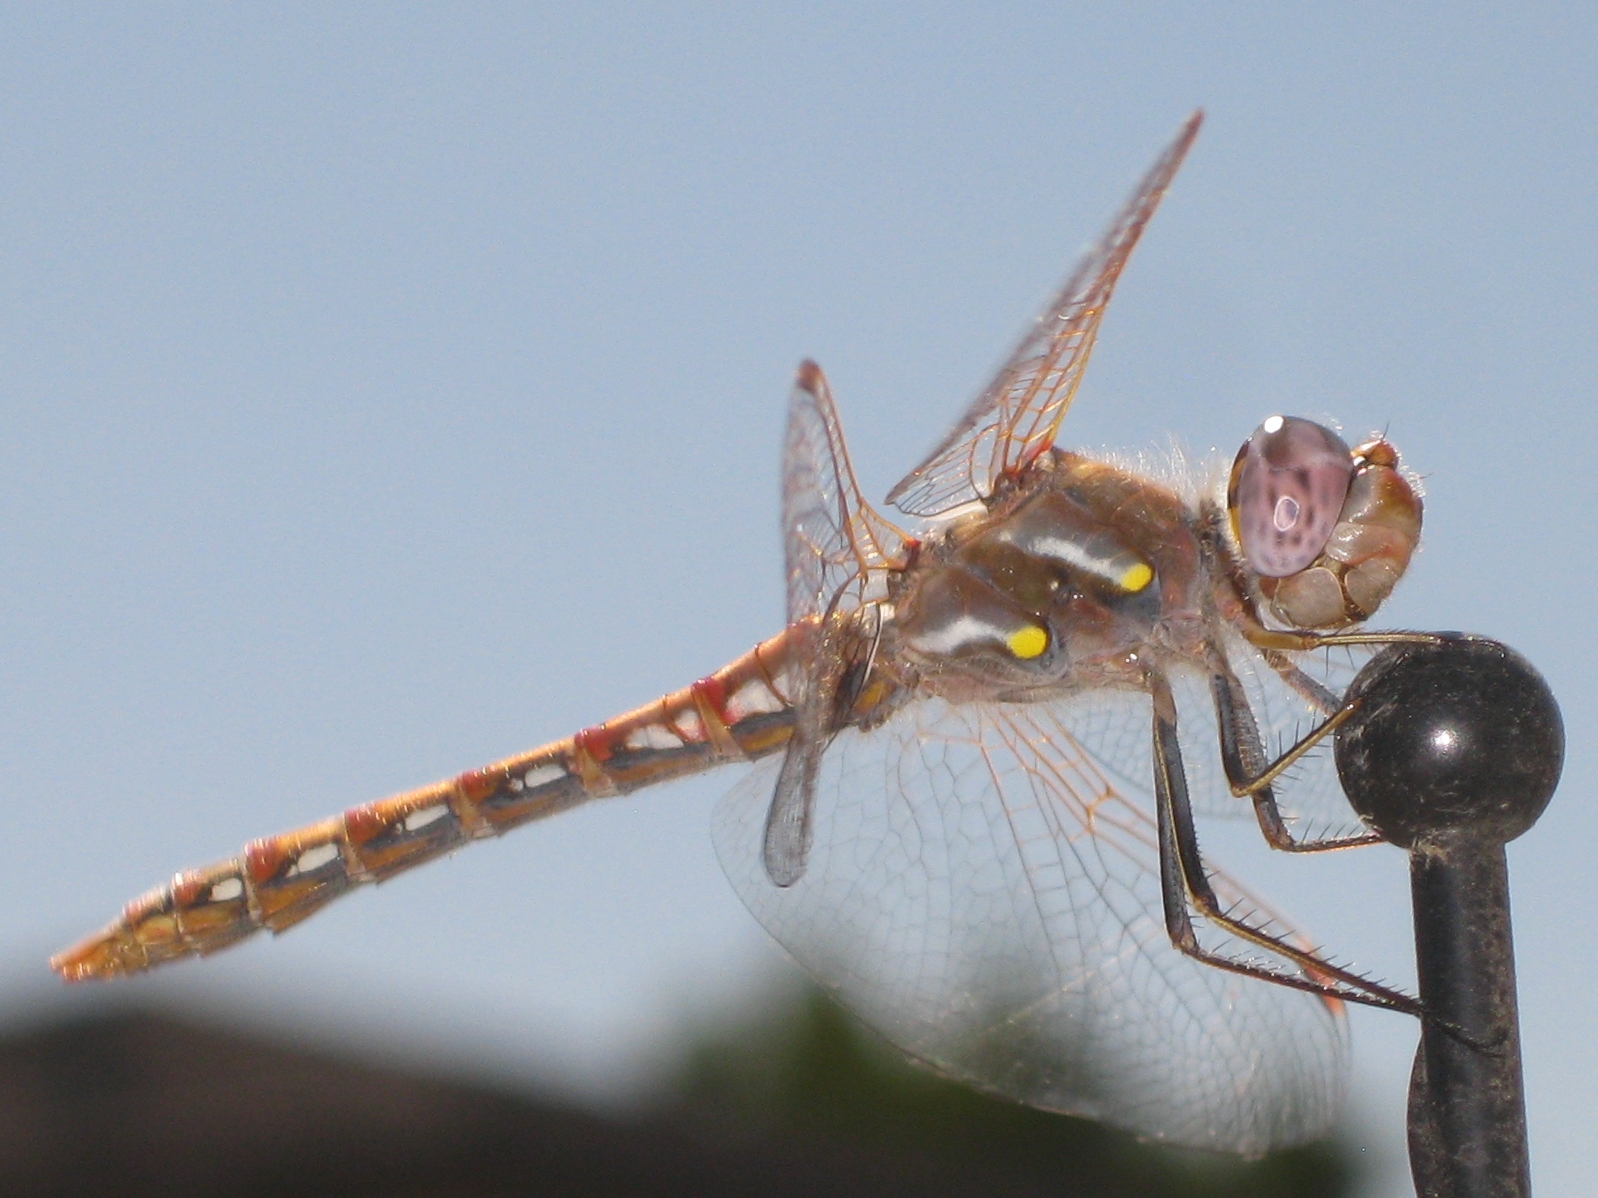 A beautiful Dragonfly that stopped to see what I was doing